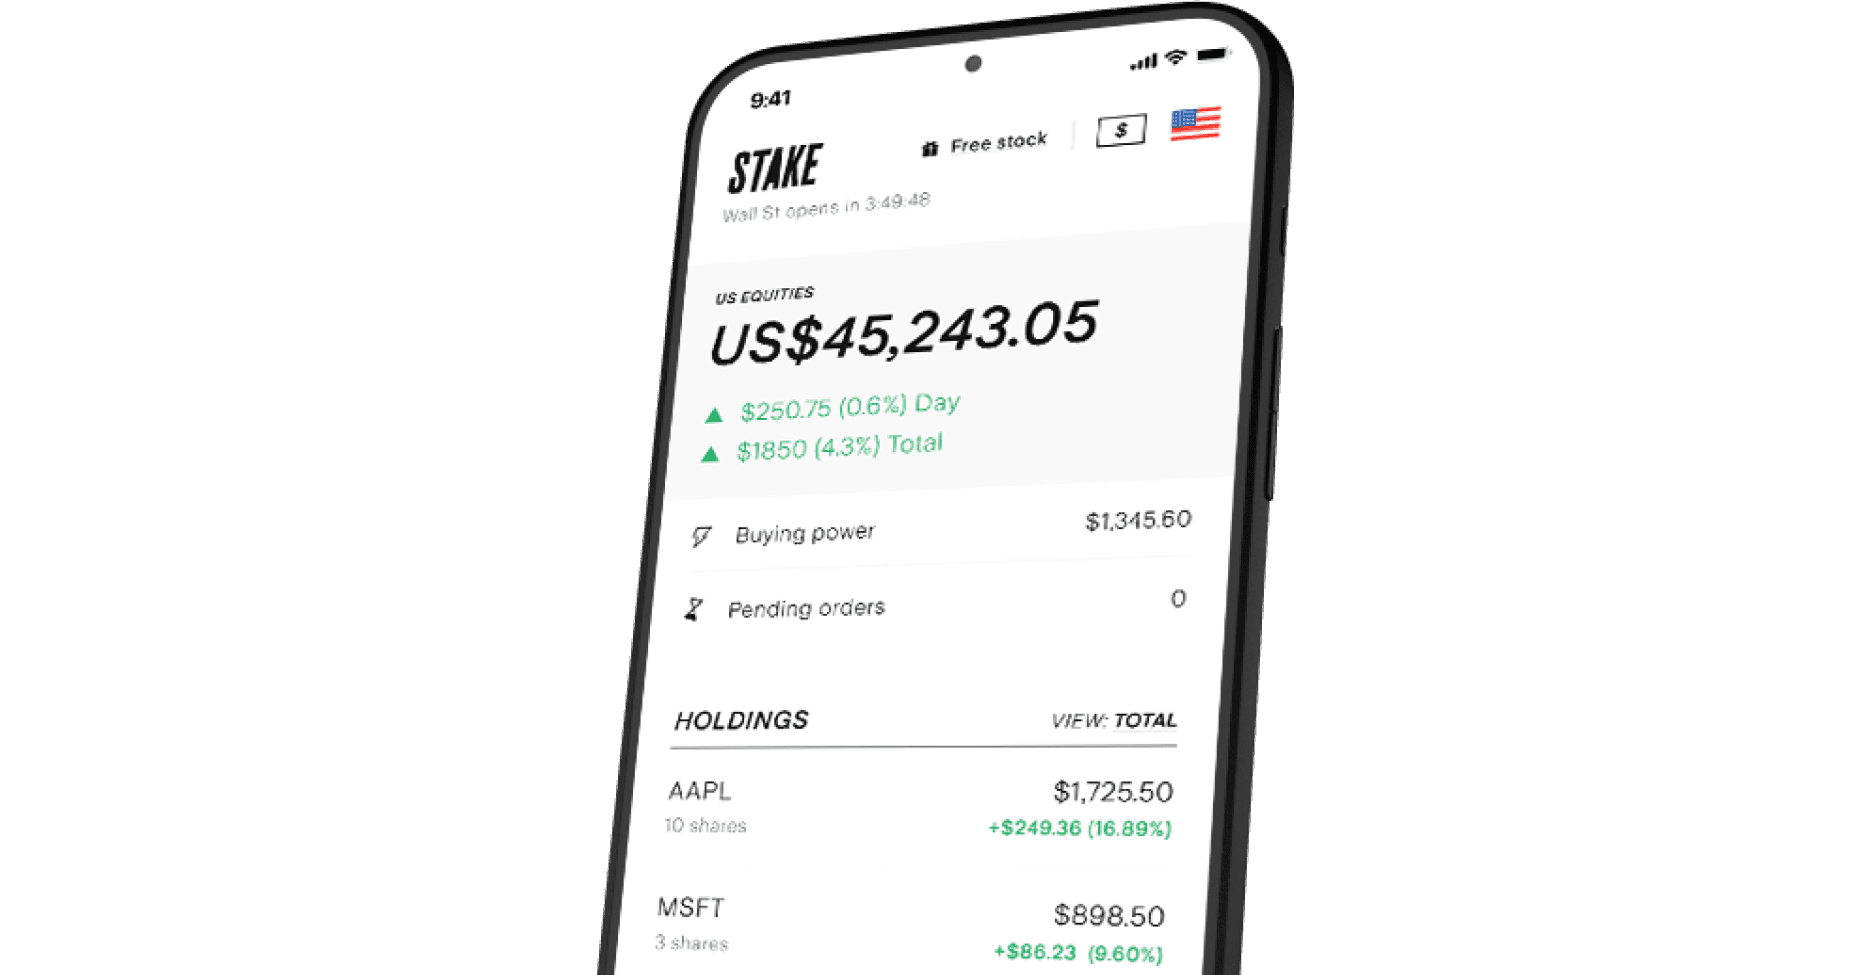 Stake phone app showing the Wall St dashboard.